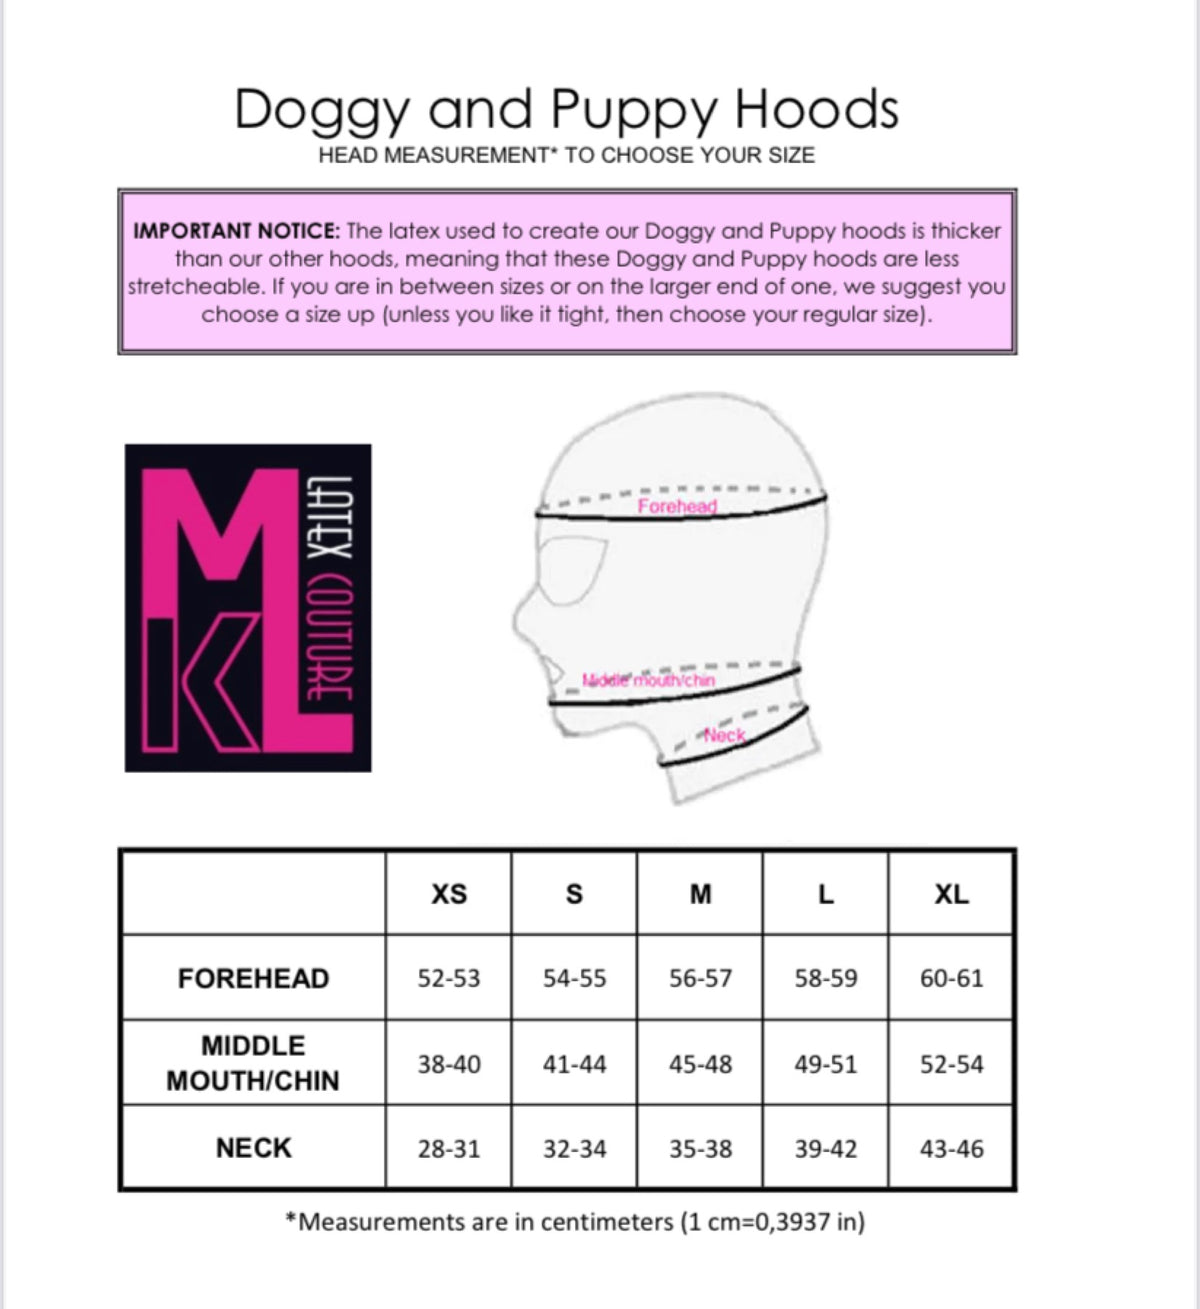 Doggy and Puppy Latex Hood Head Measurement